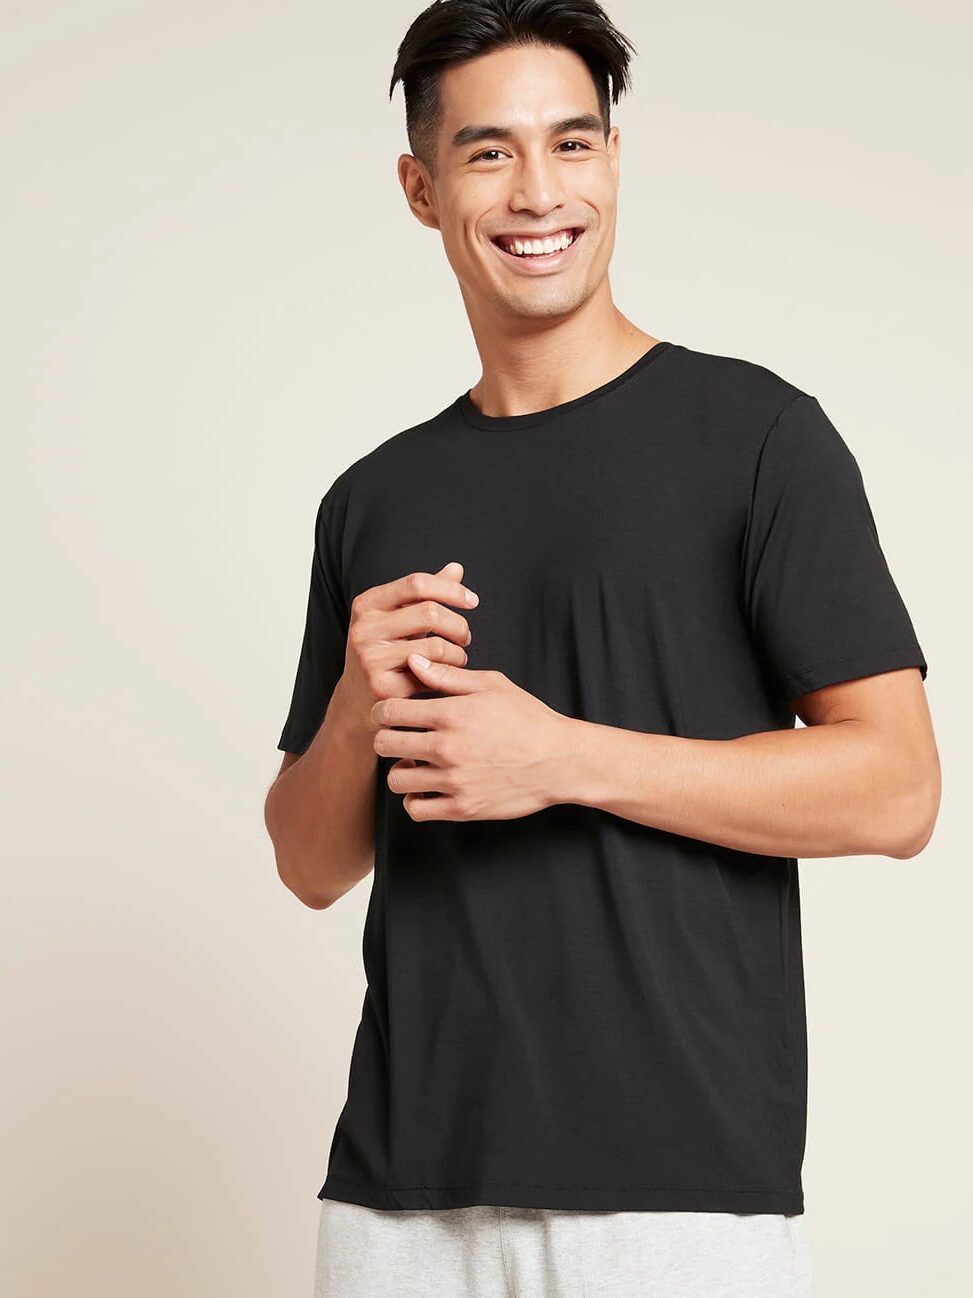 A man in a black t-shirt and grey pants smiles and looks at the camera, standing against a plain beige background.